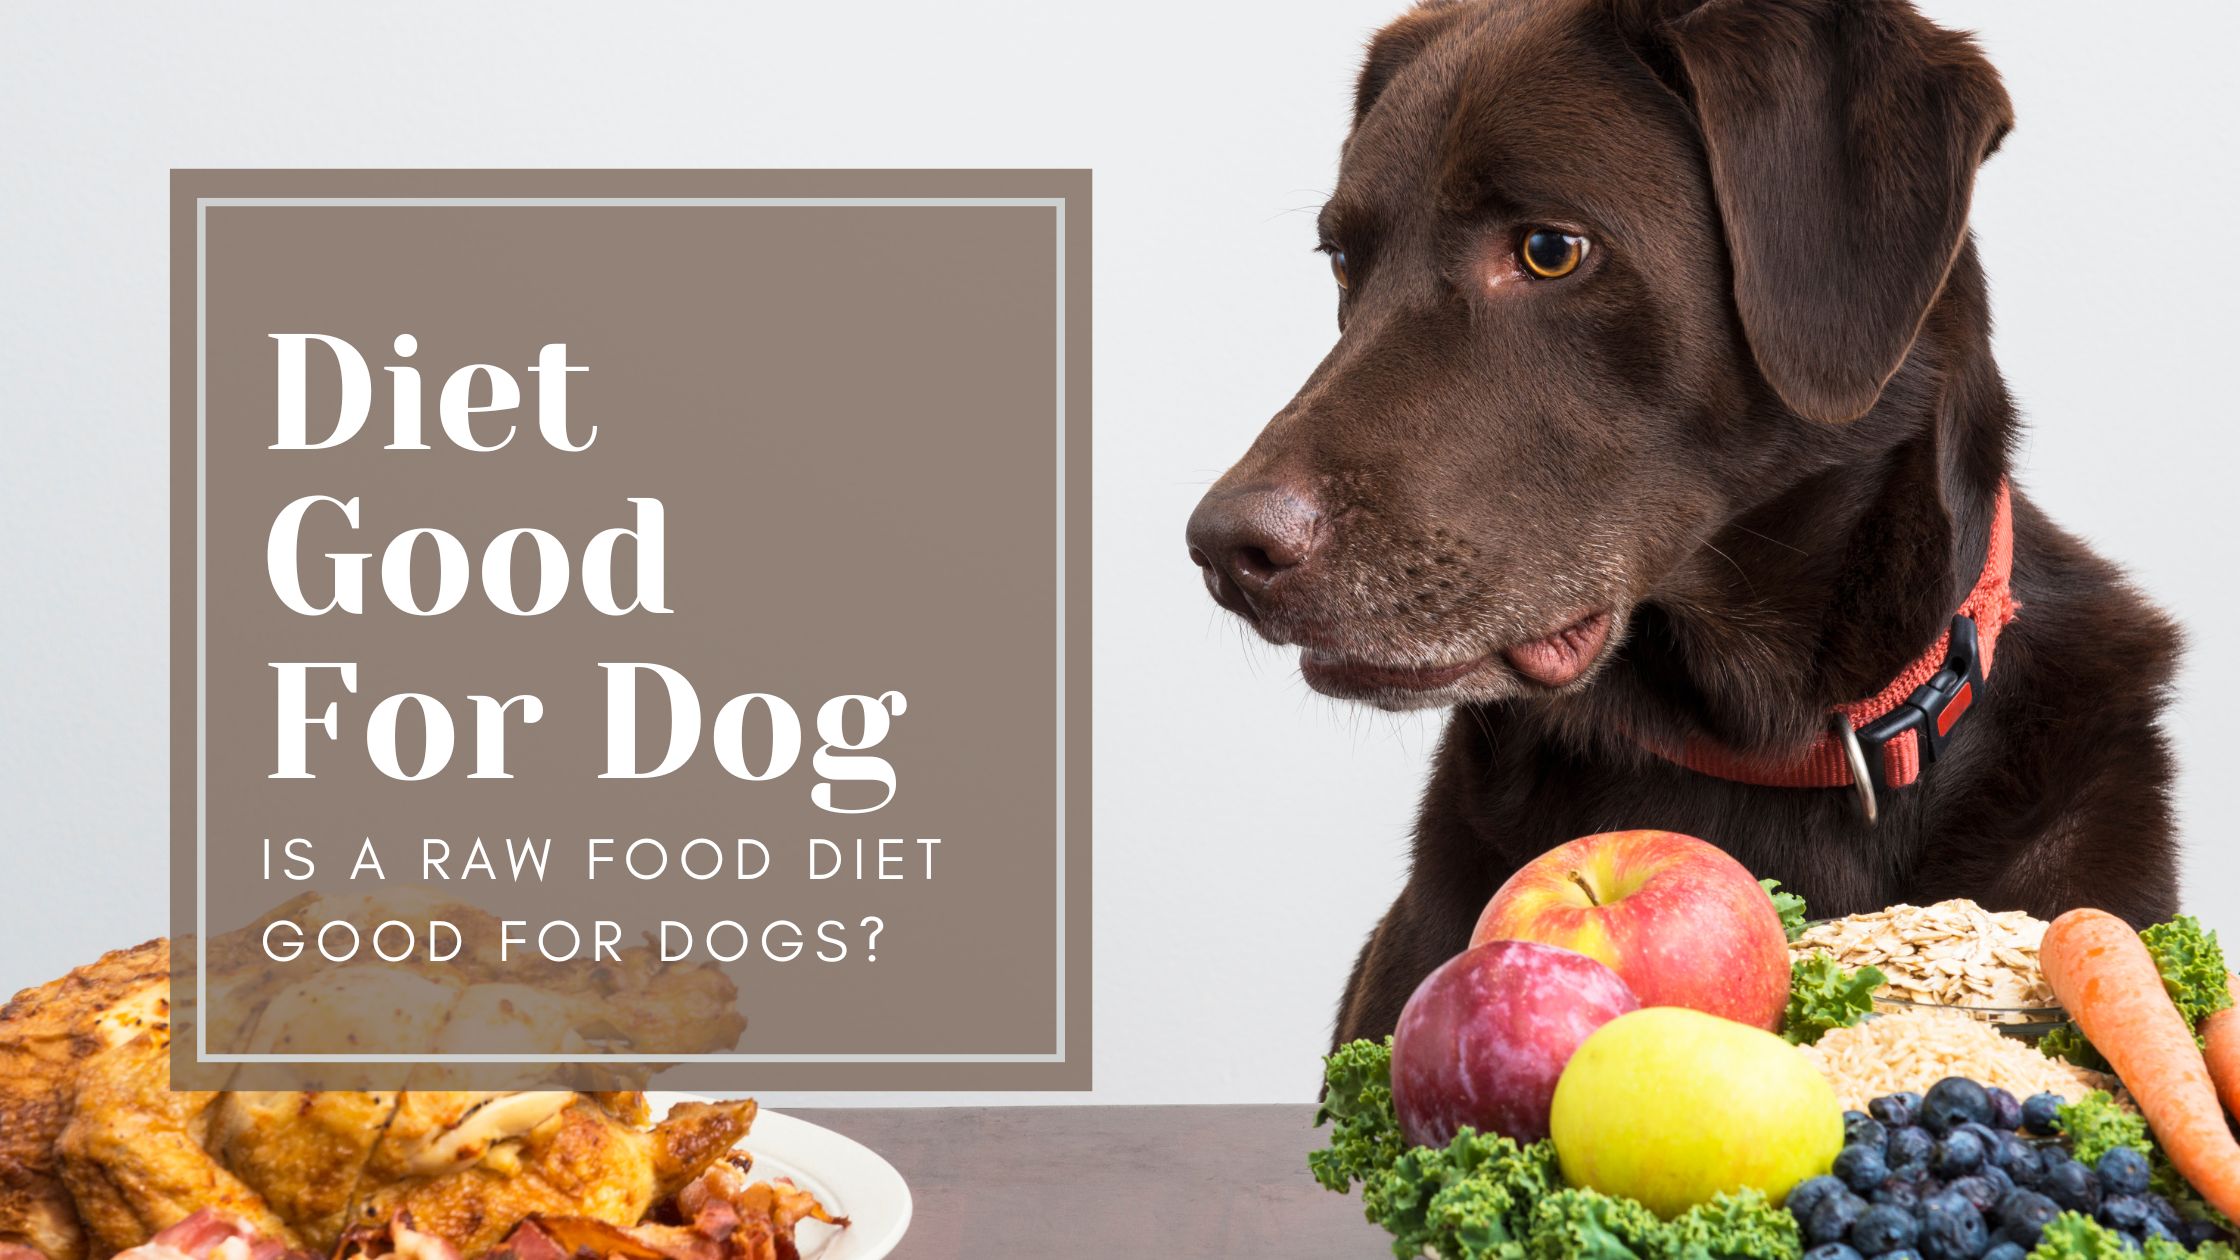 Is A Raw Food Diet Good For Dogs?